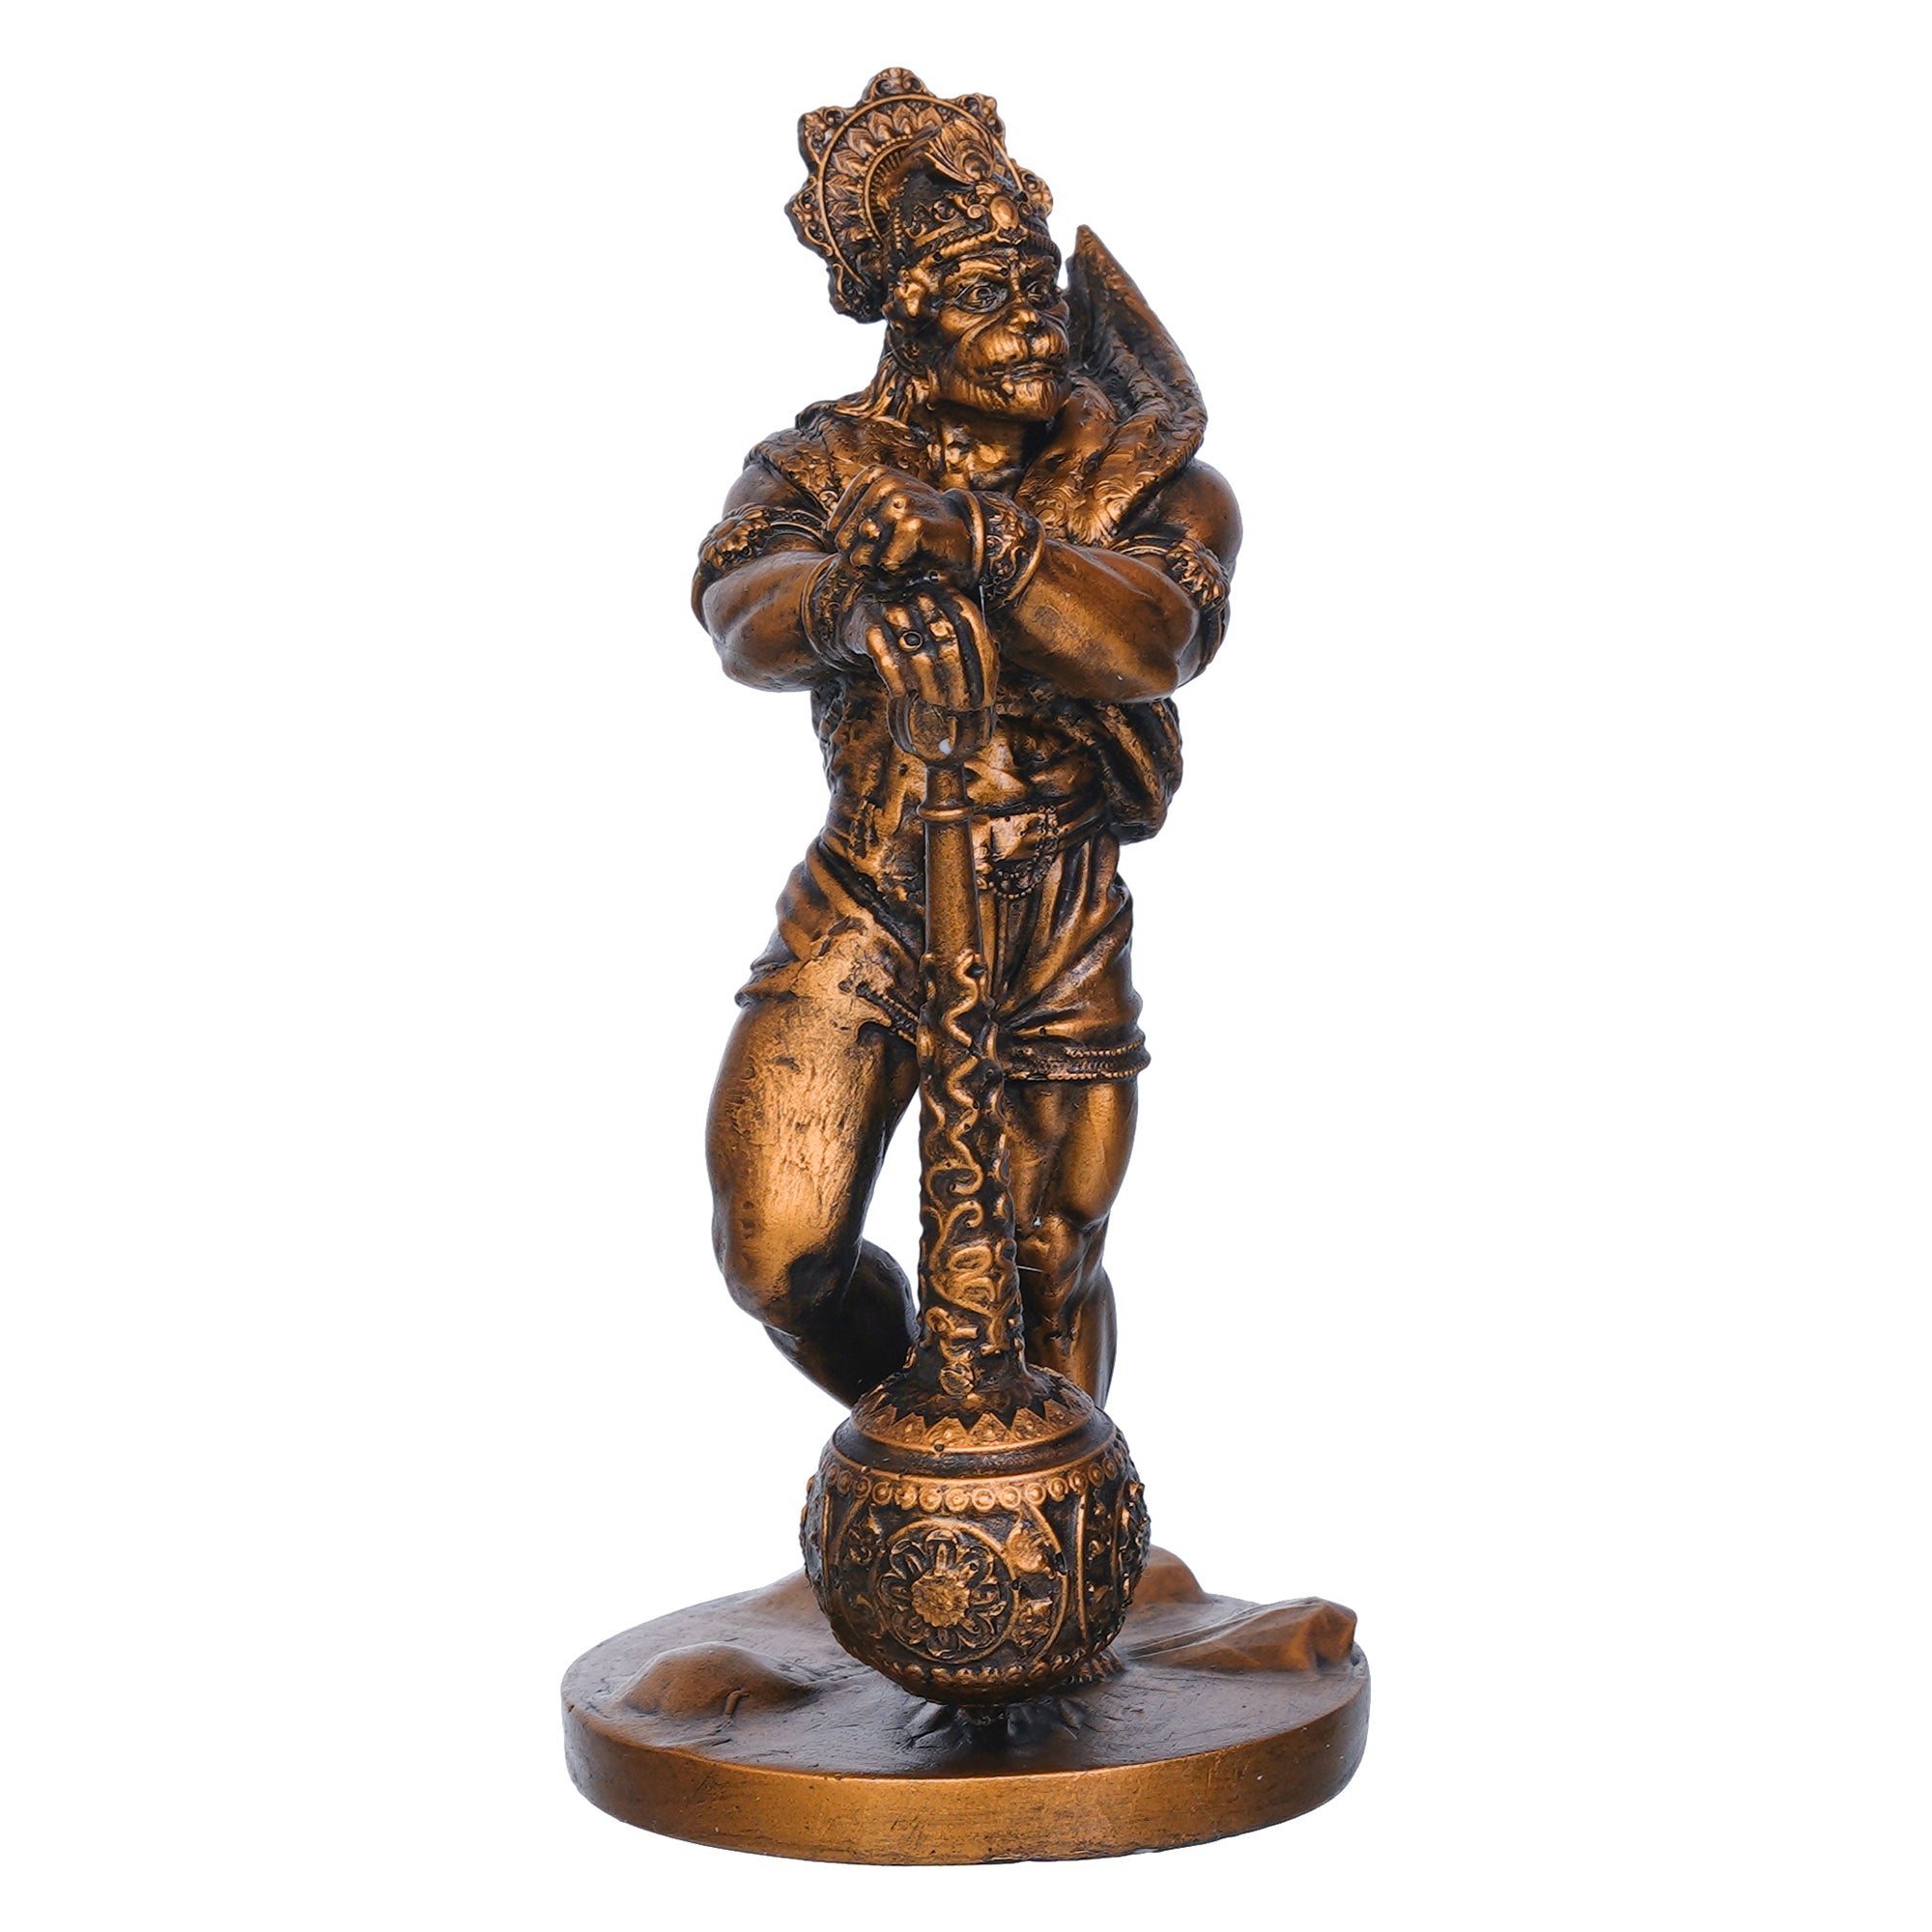 Golden Polyresin Handcrafted Standing Lord Hanuman Idol with Gada/Mace 6